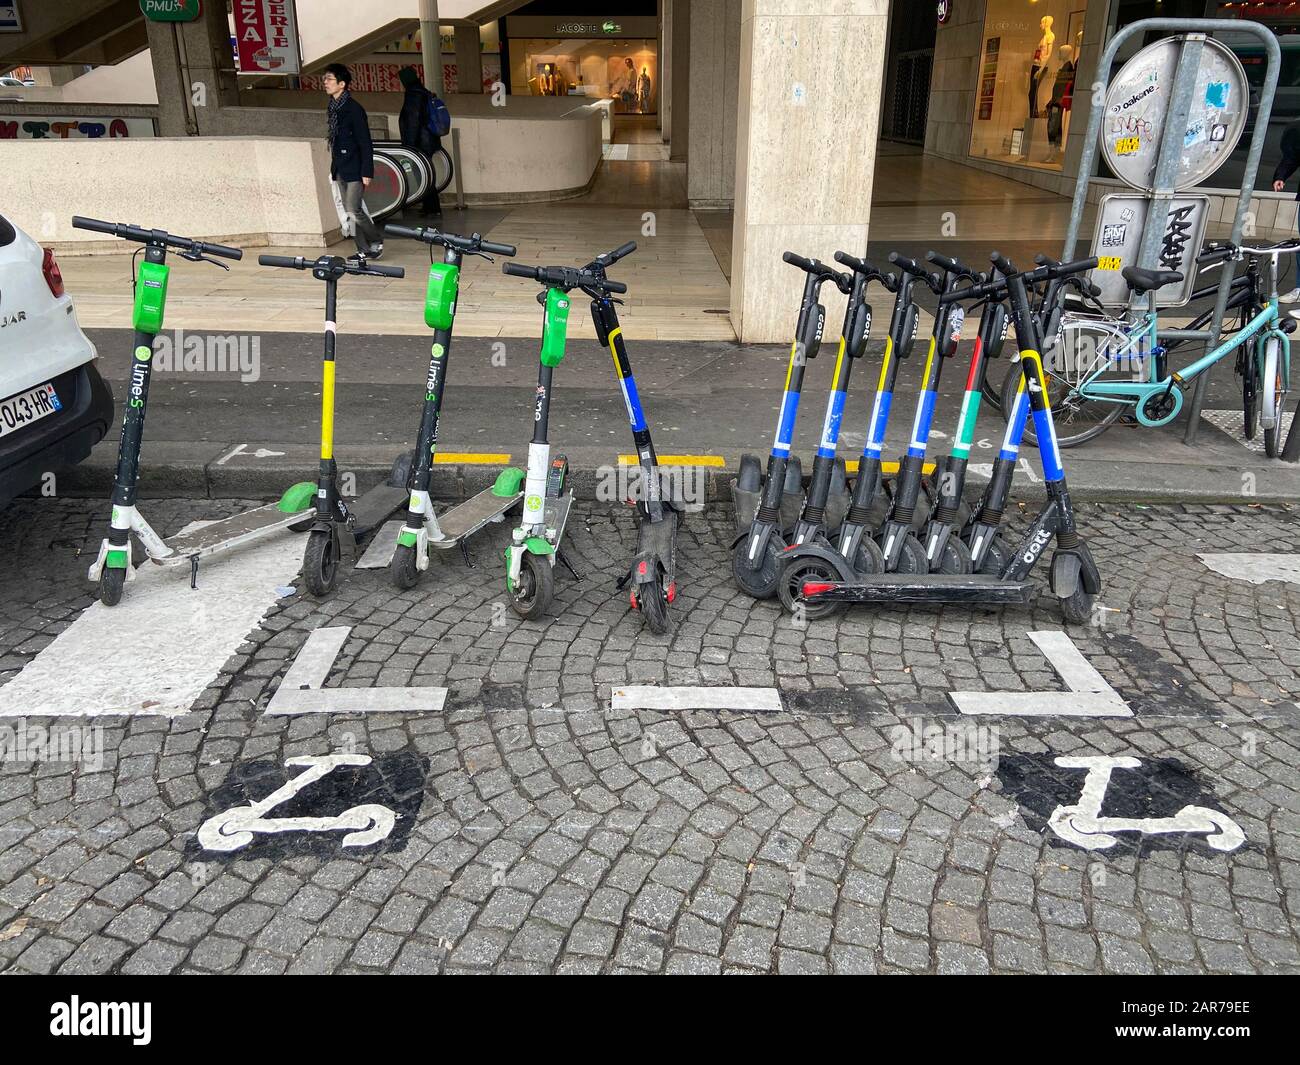 PARKING SPOT IN PARIS FOR ELECTRIC SCOOTERS Stock Photo